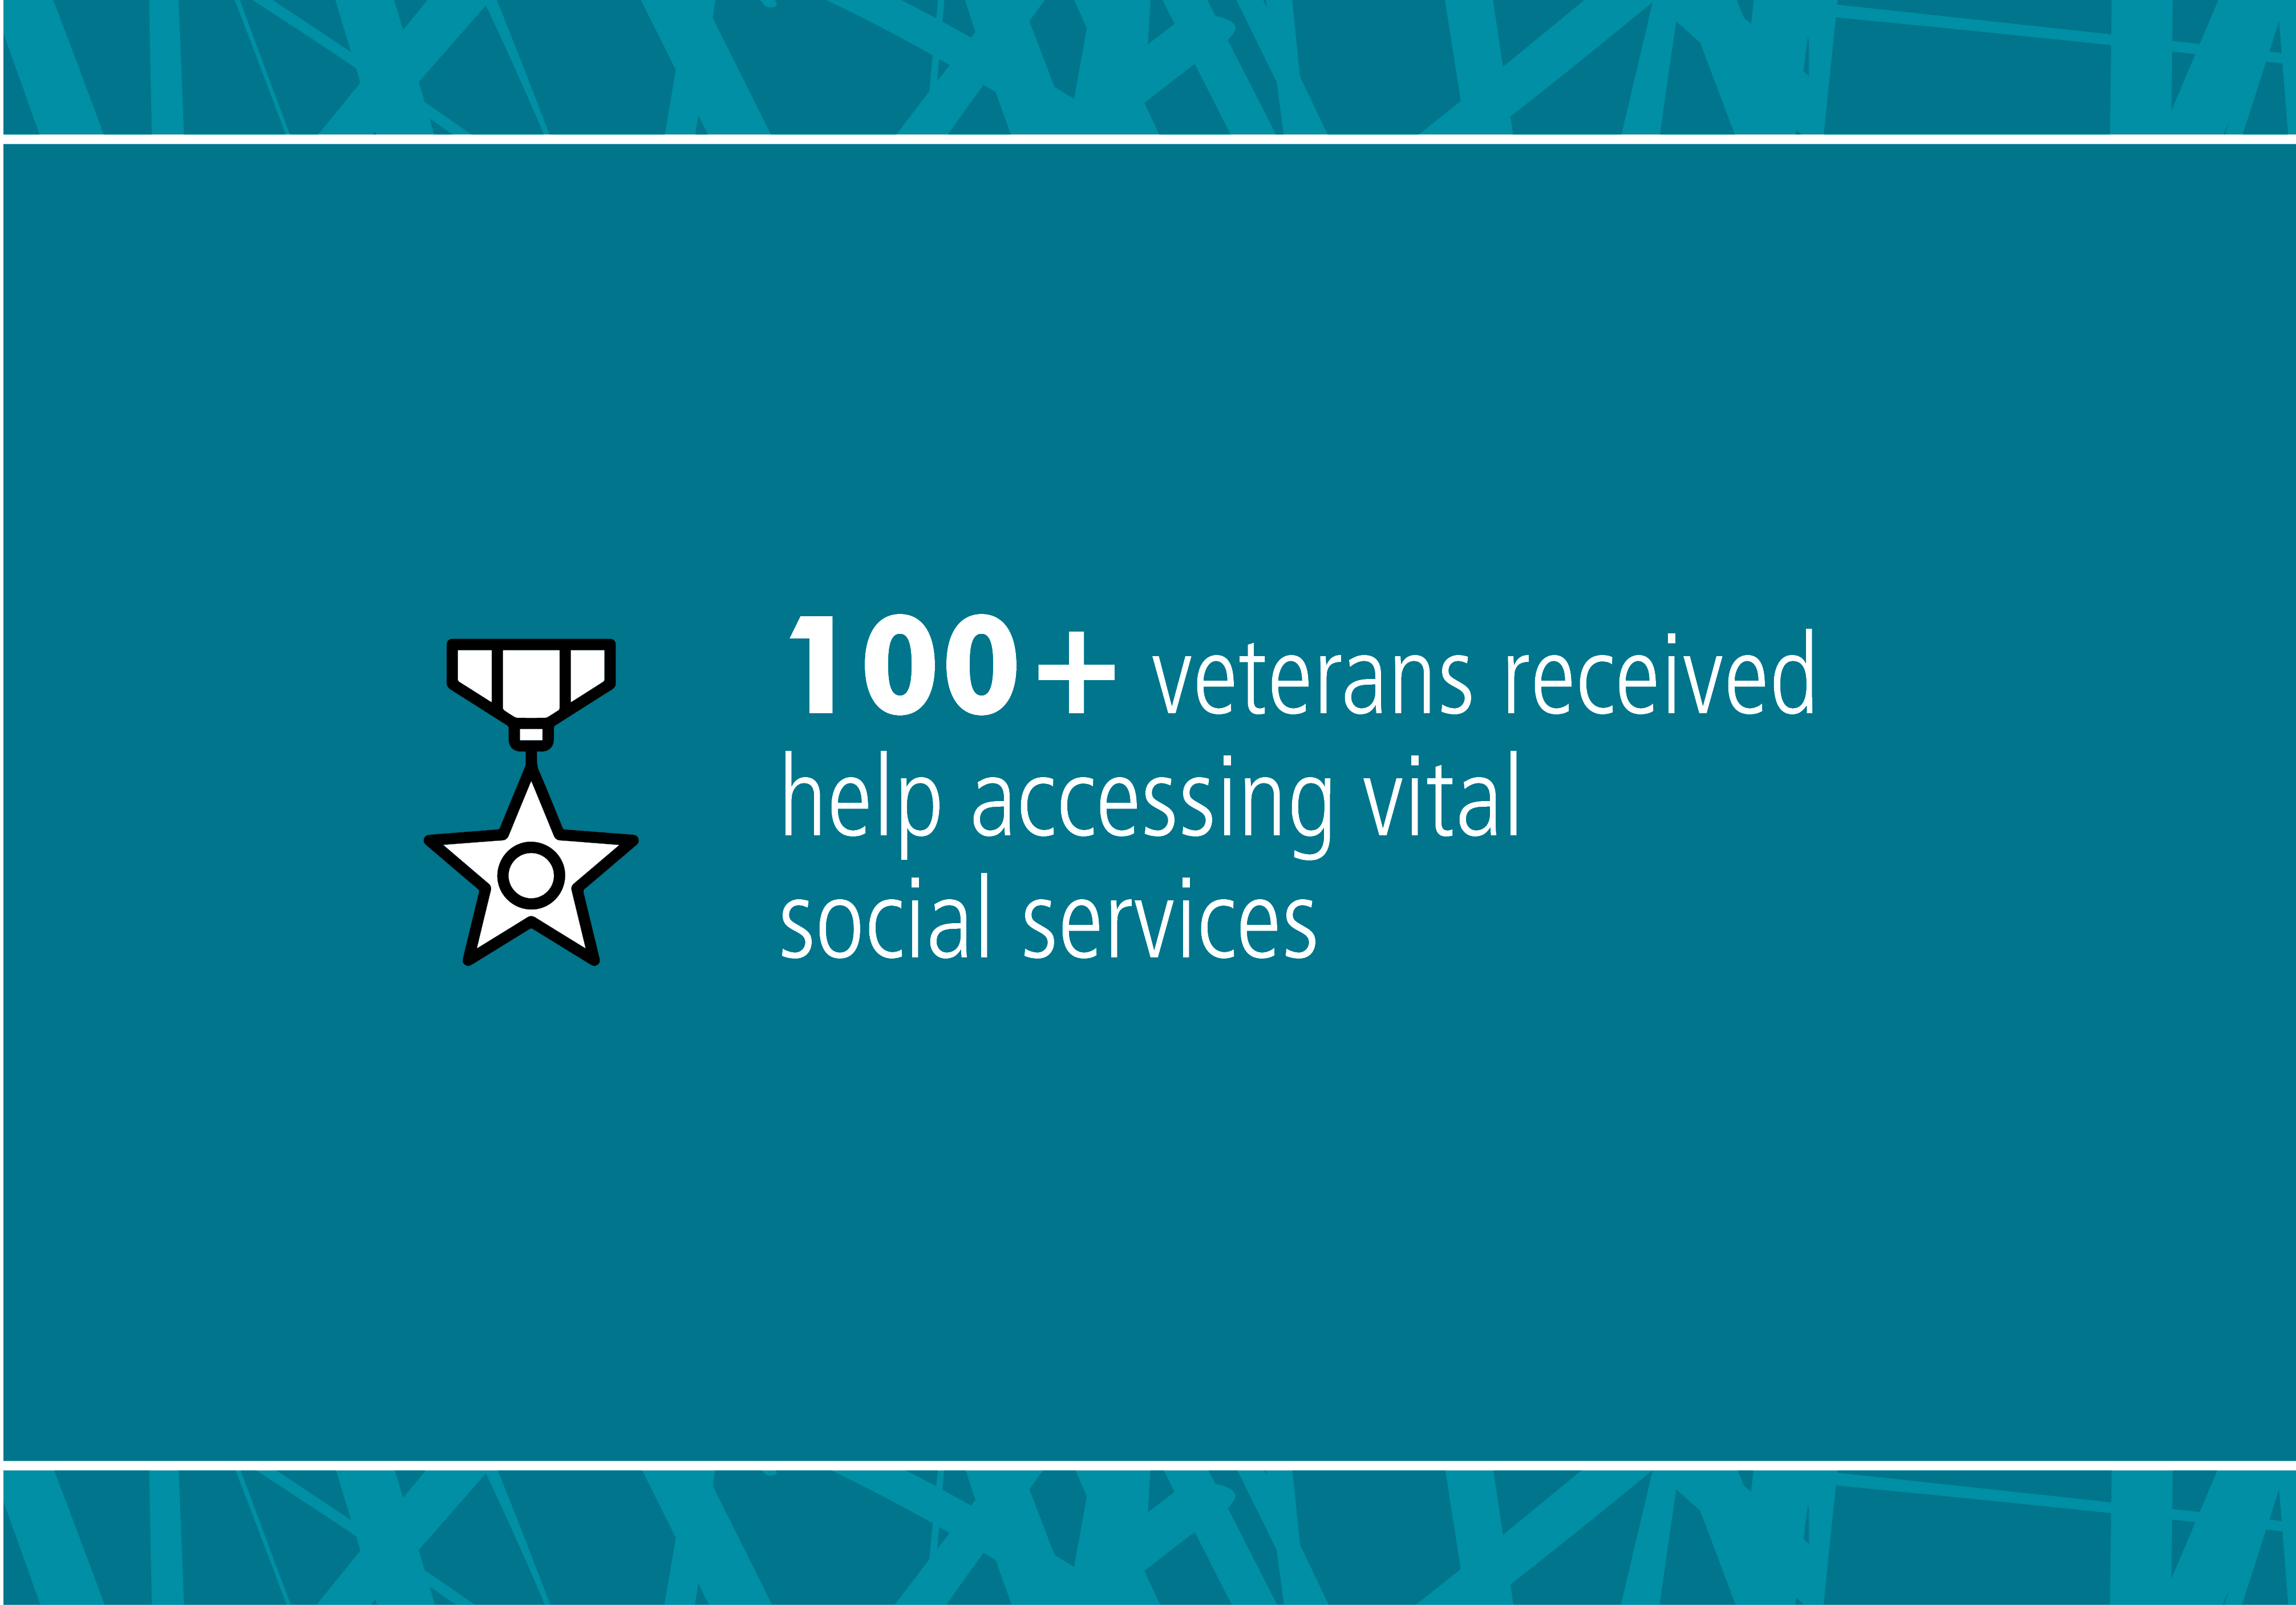 100+ veterans received help accessing vital social services and program